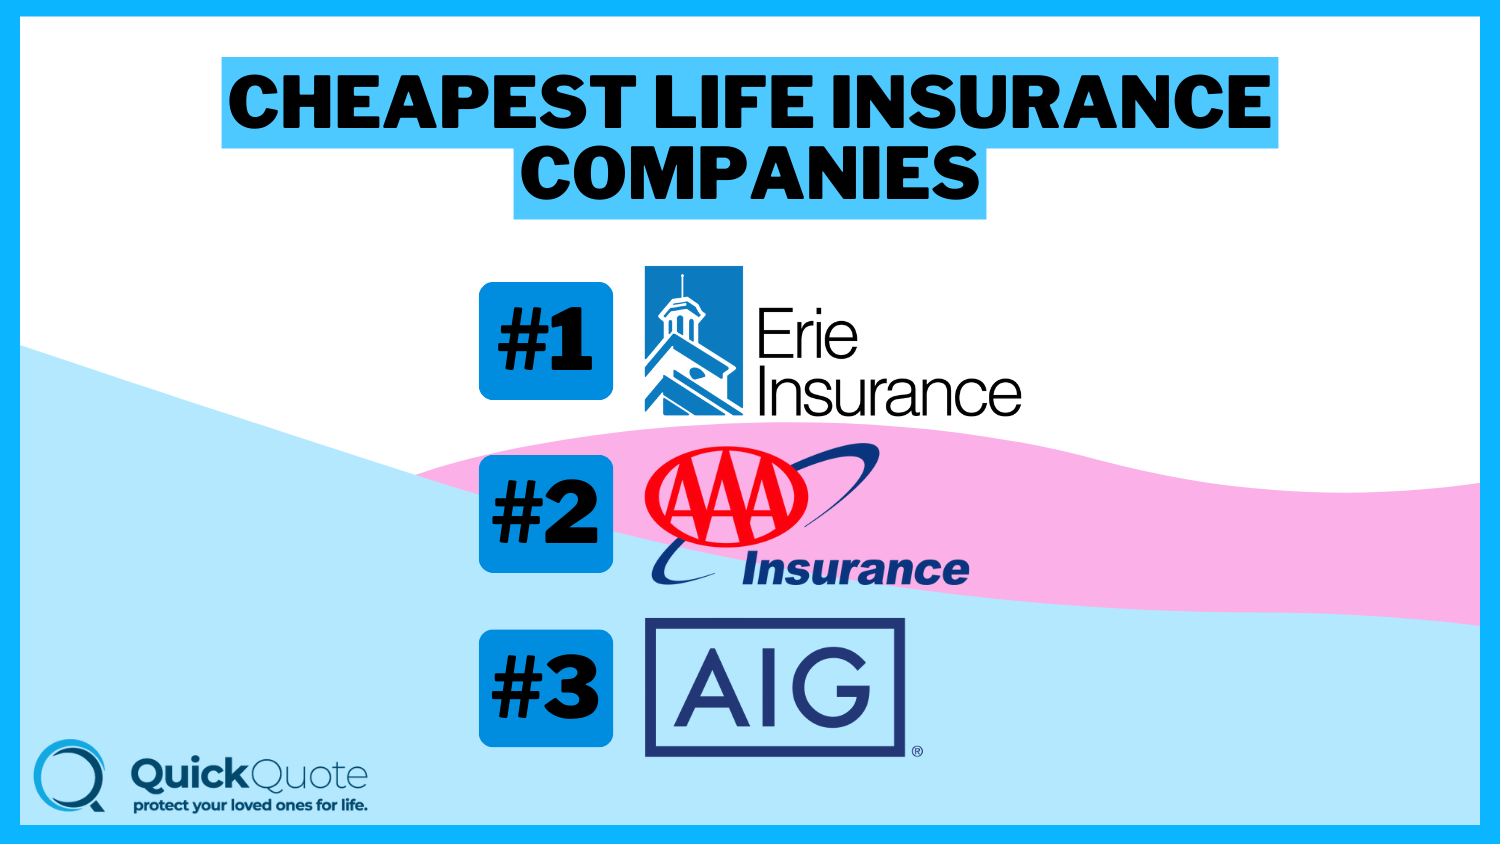 Erie Insurance, AAA and AIG: Cheapest Life Insurance Companies